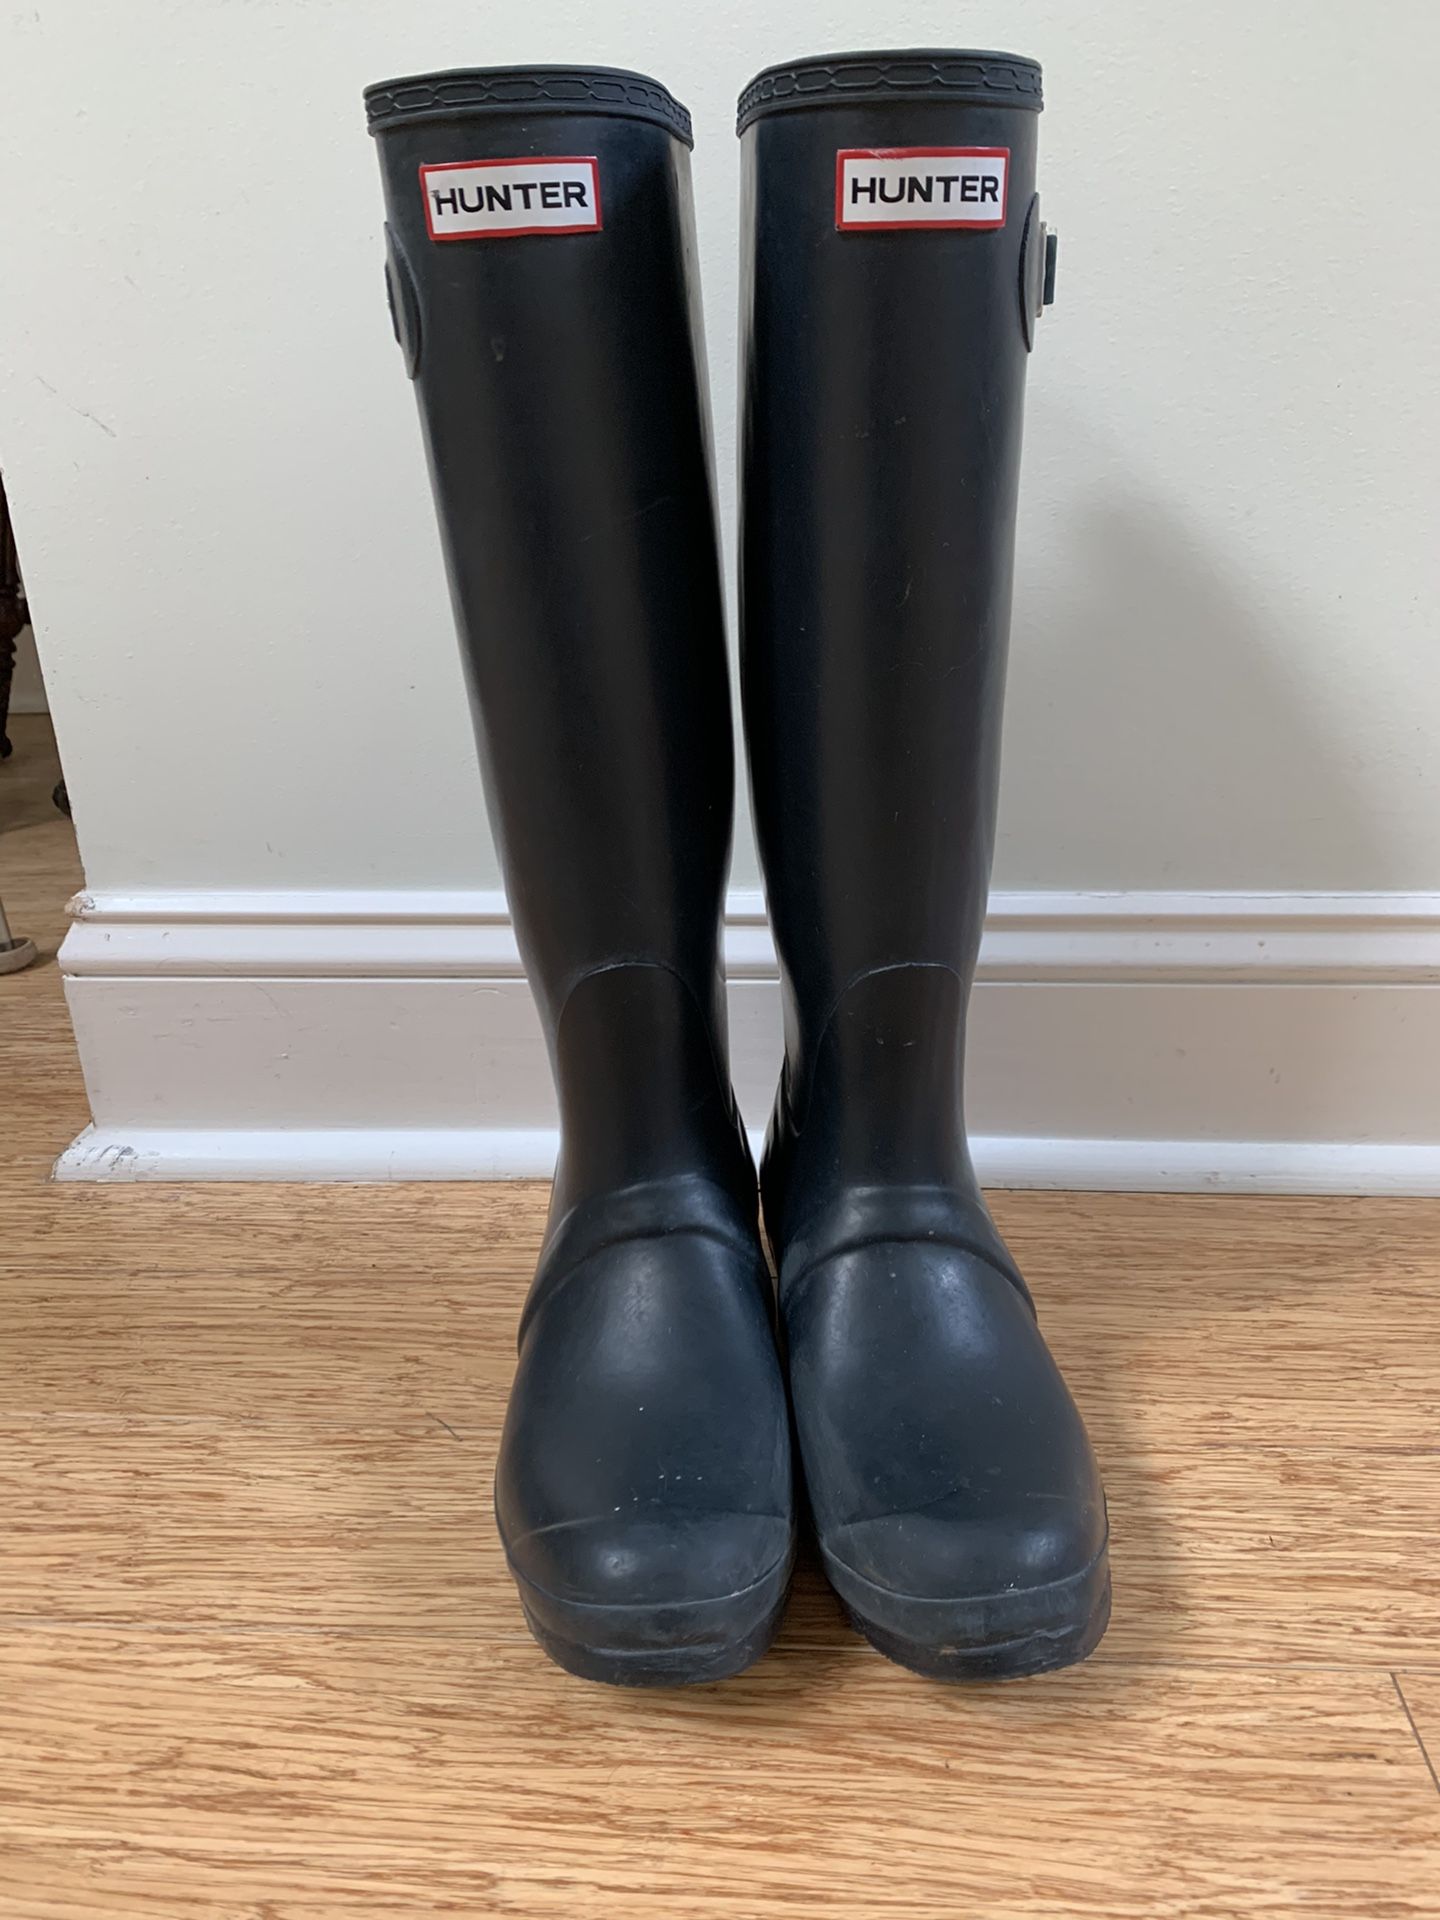 Hunter original tall rain boots Navy 7M Has a couple of scuffs and one buckle is broken but shoes are in EUC otherwise